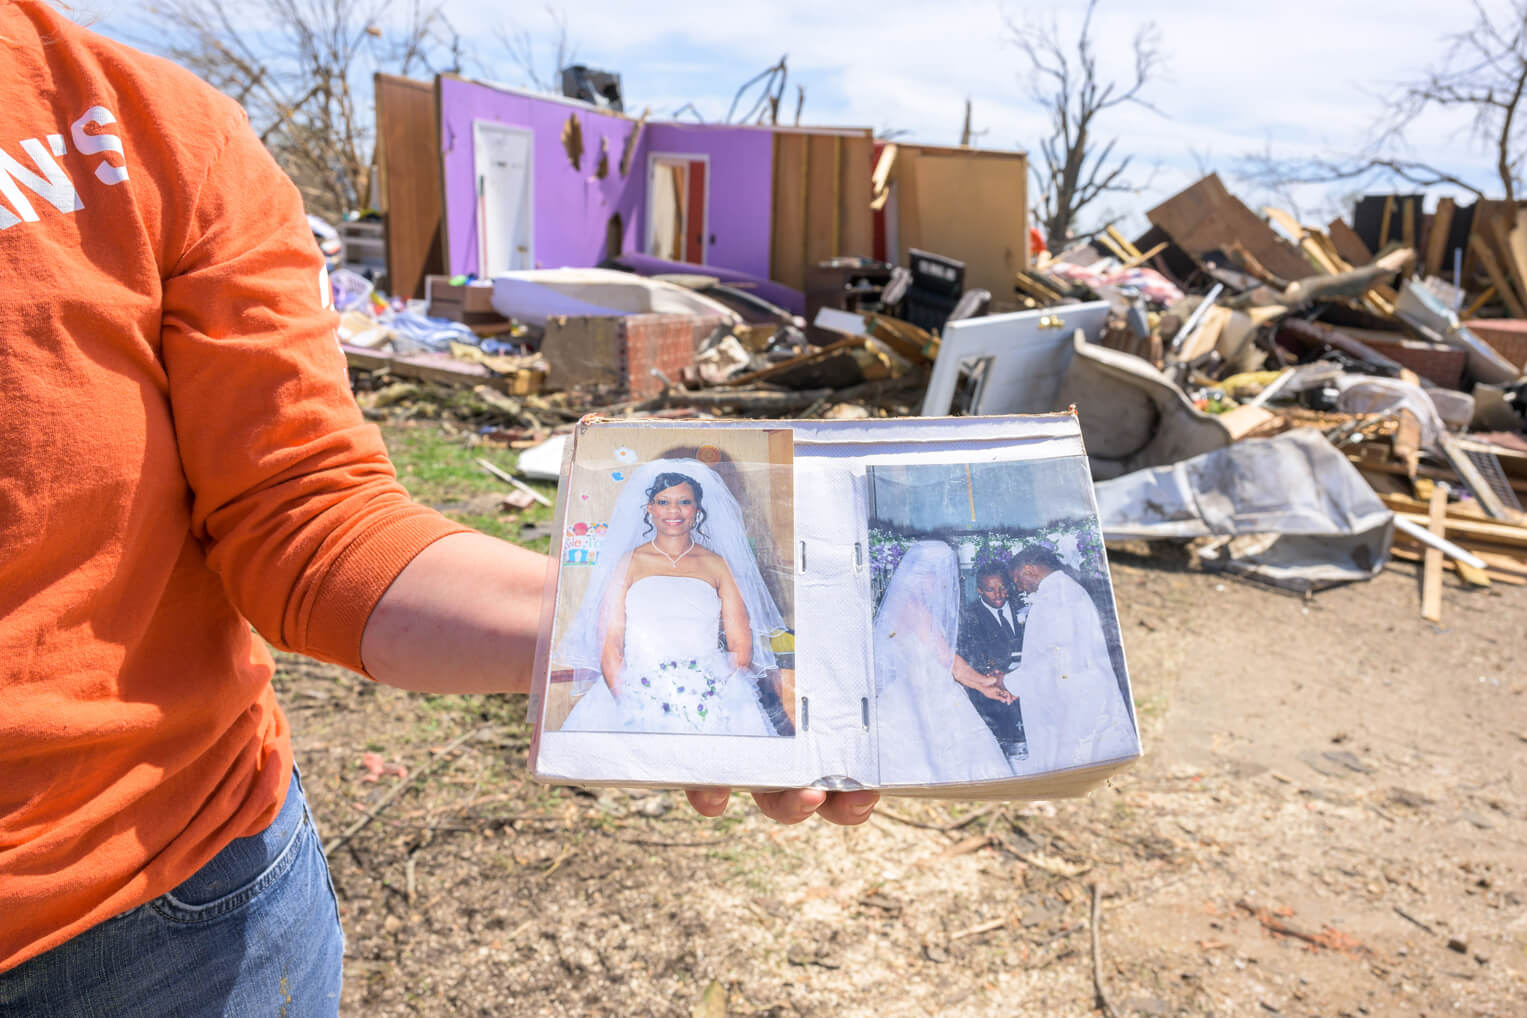 A volunteer displays Becky's wedding album, which was recovered from the wreckage.